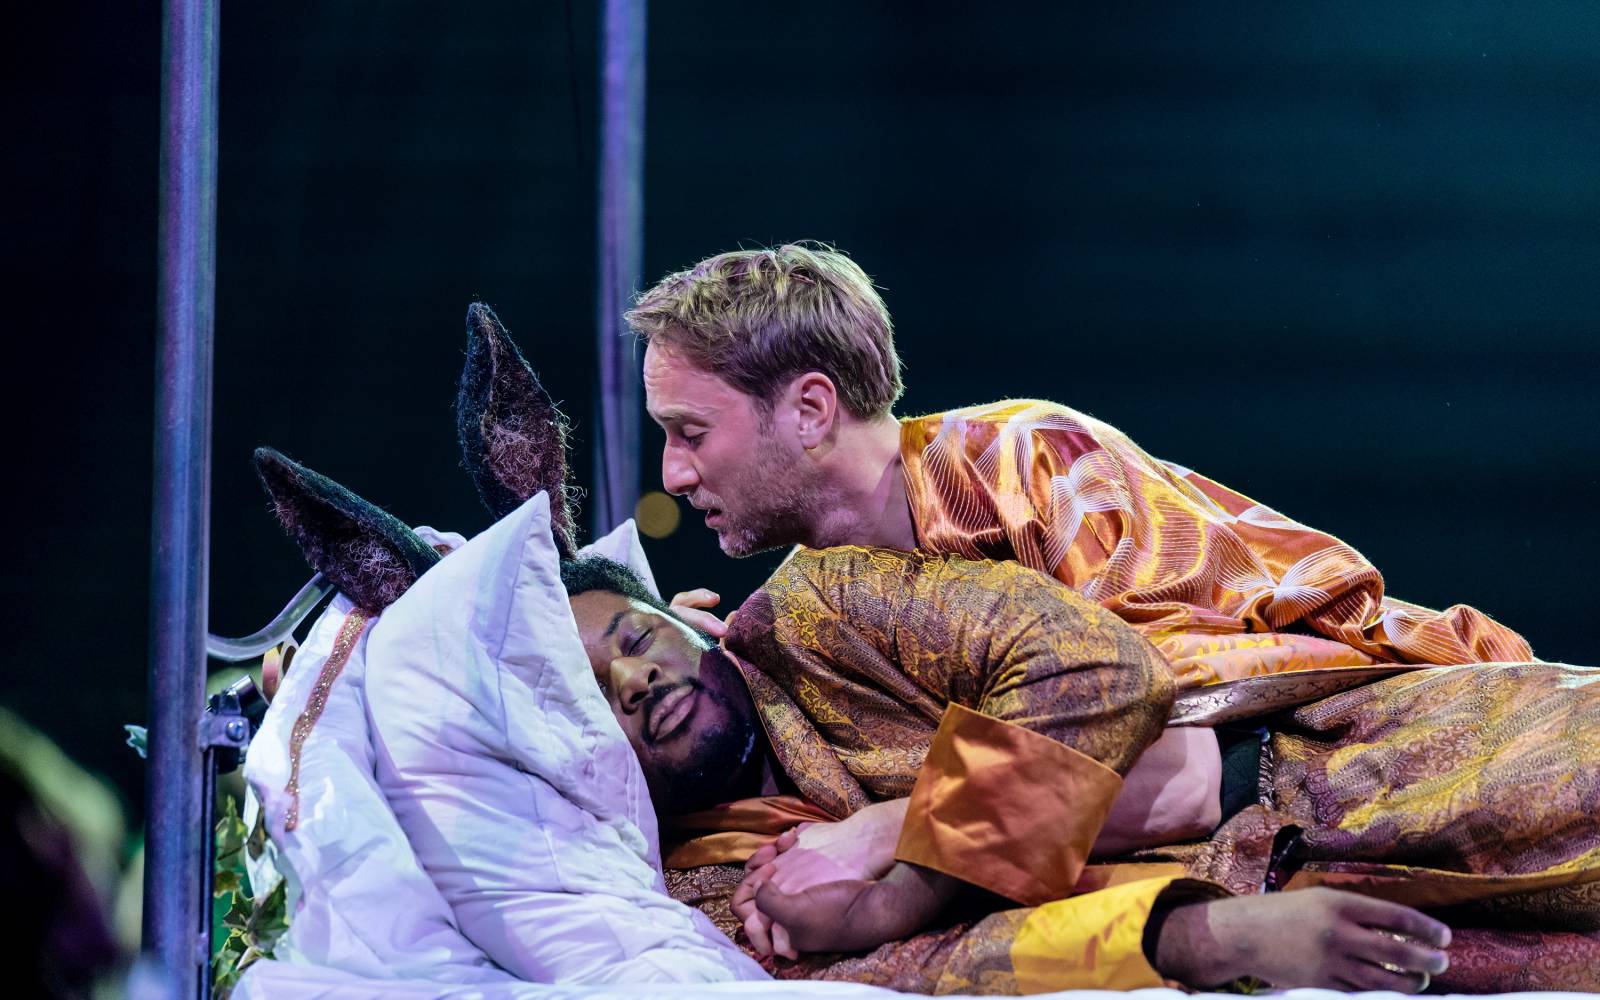 Hammed Animashaun (Bottom) sleeps in a bed, as Oliver Chris (Oberon) leans lustily over him